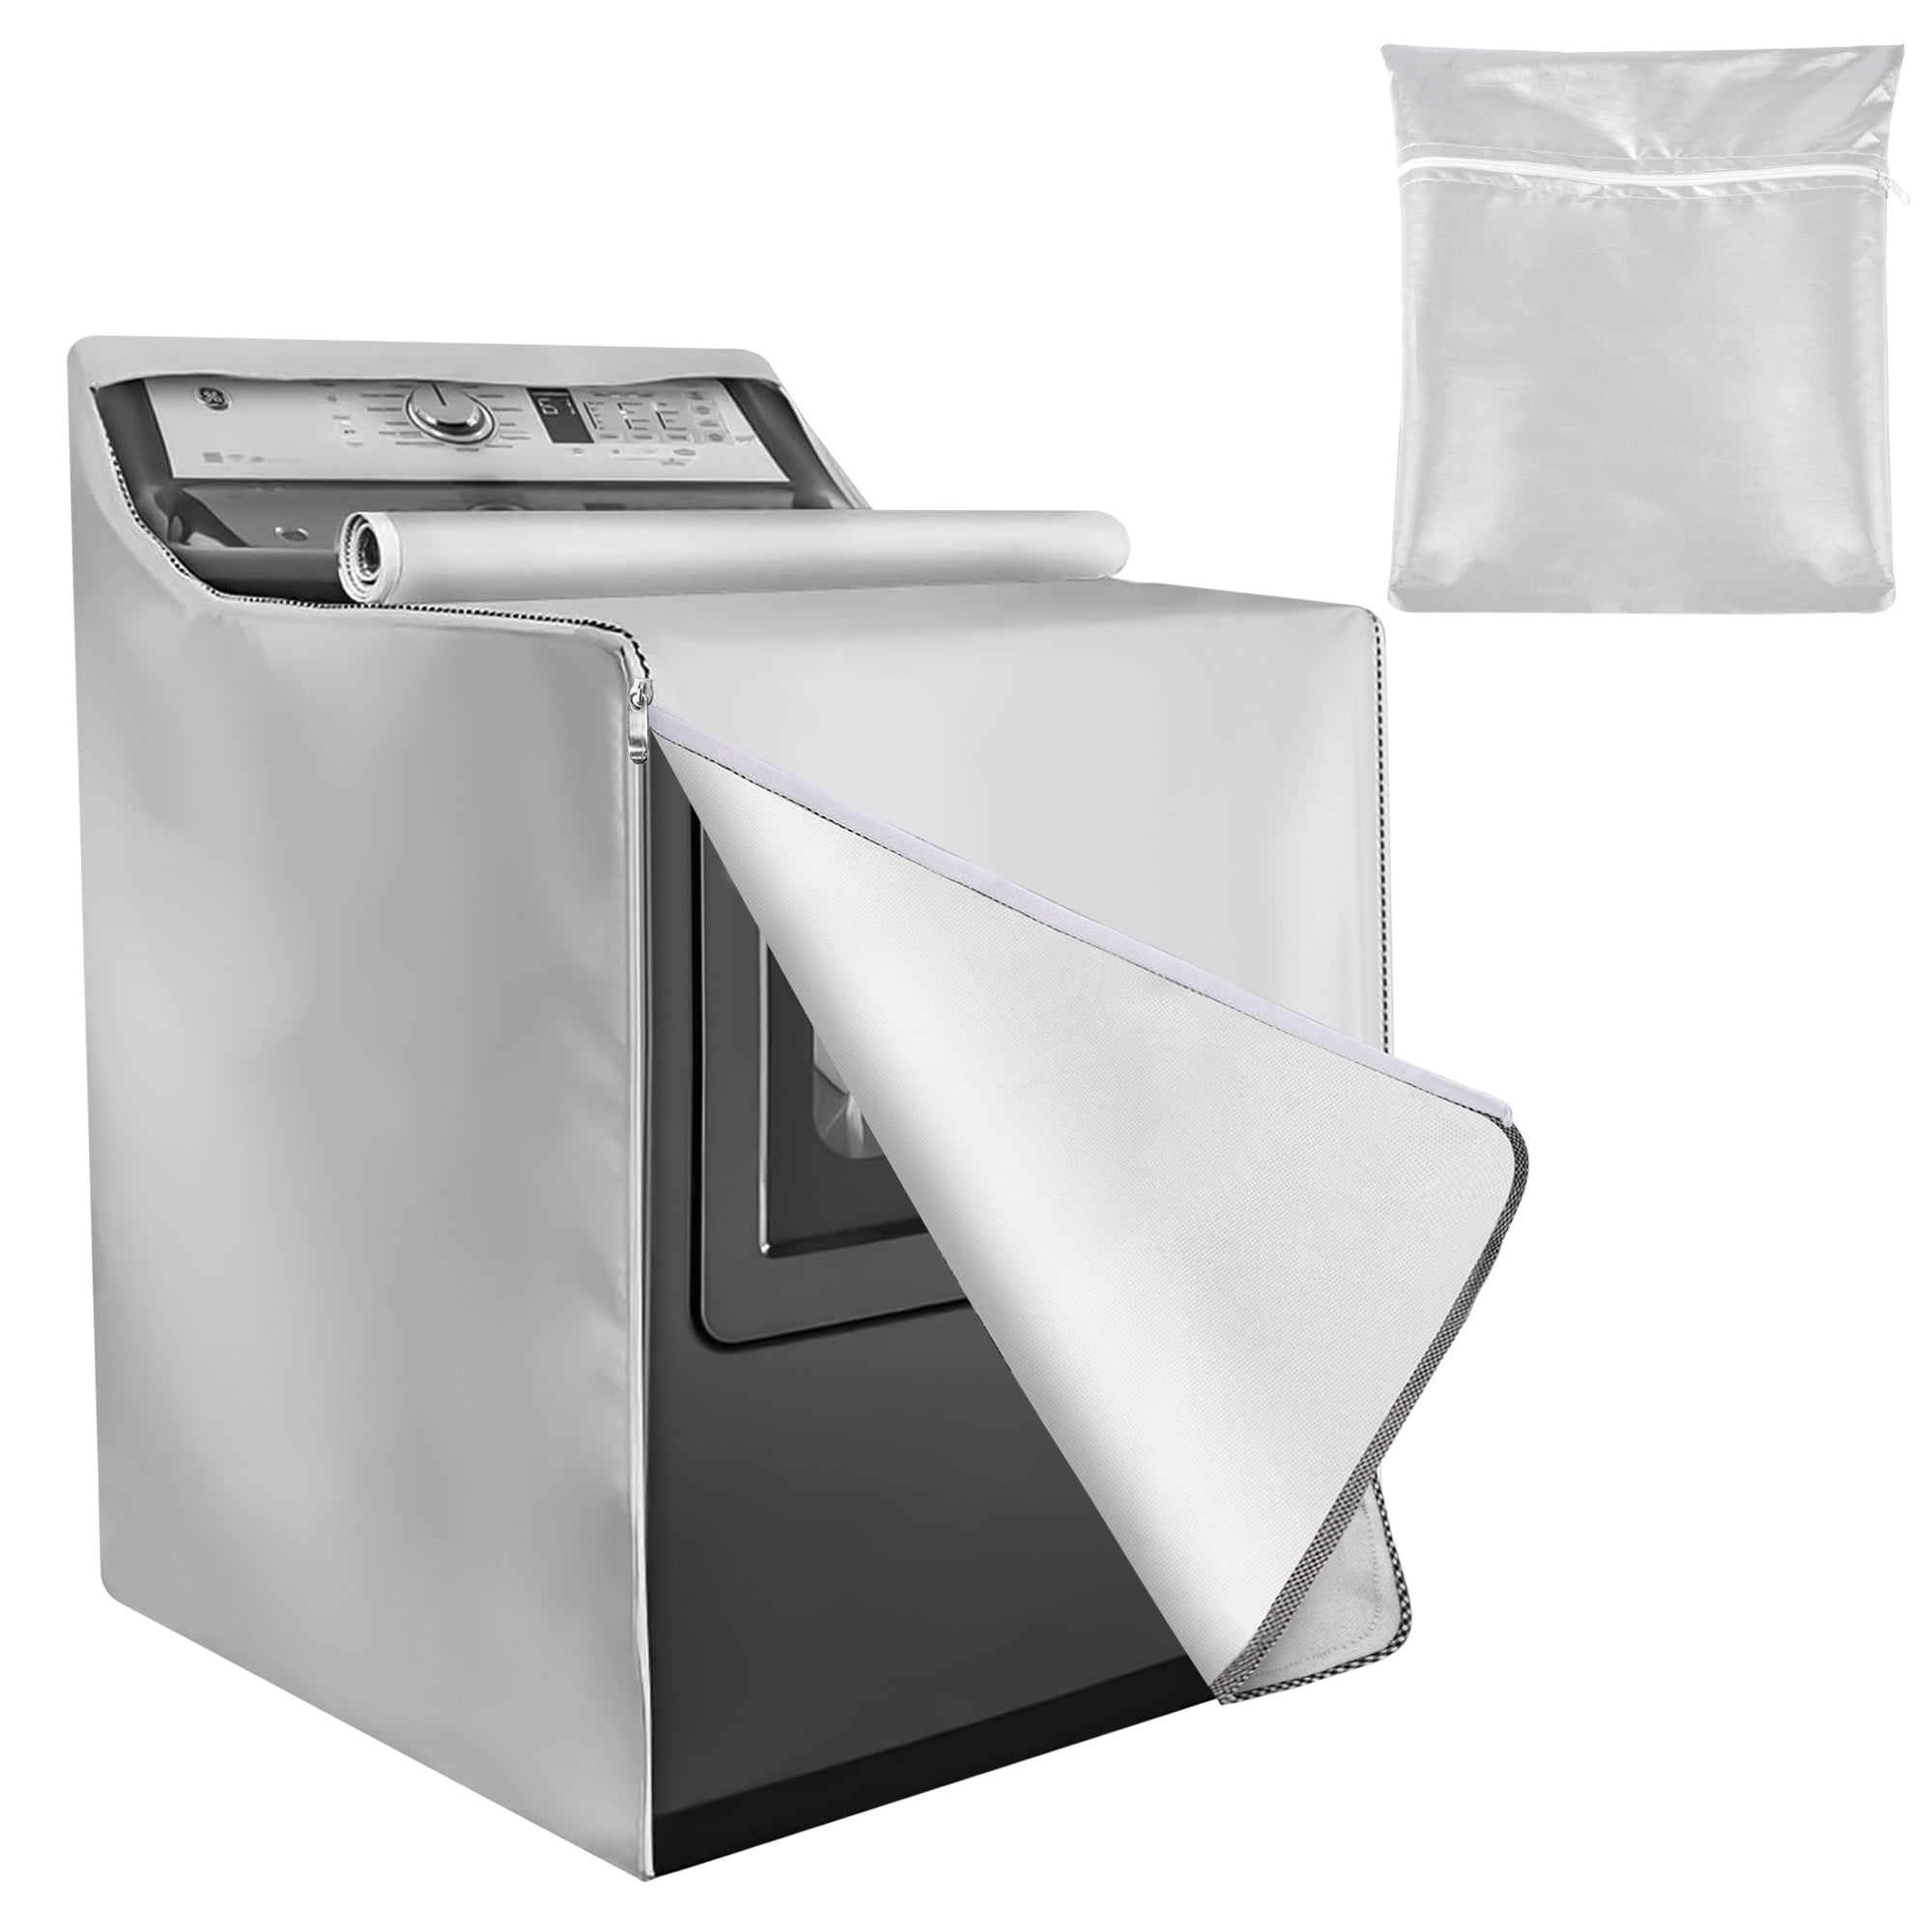 Mr.You Wash Machine Cover,Washer/Dryer Cover for Front-loading Machine,With  Double Zipper Design Washing Machine Cover,W30in D29in H42in